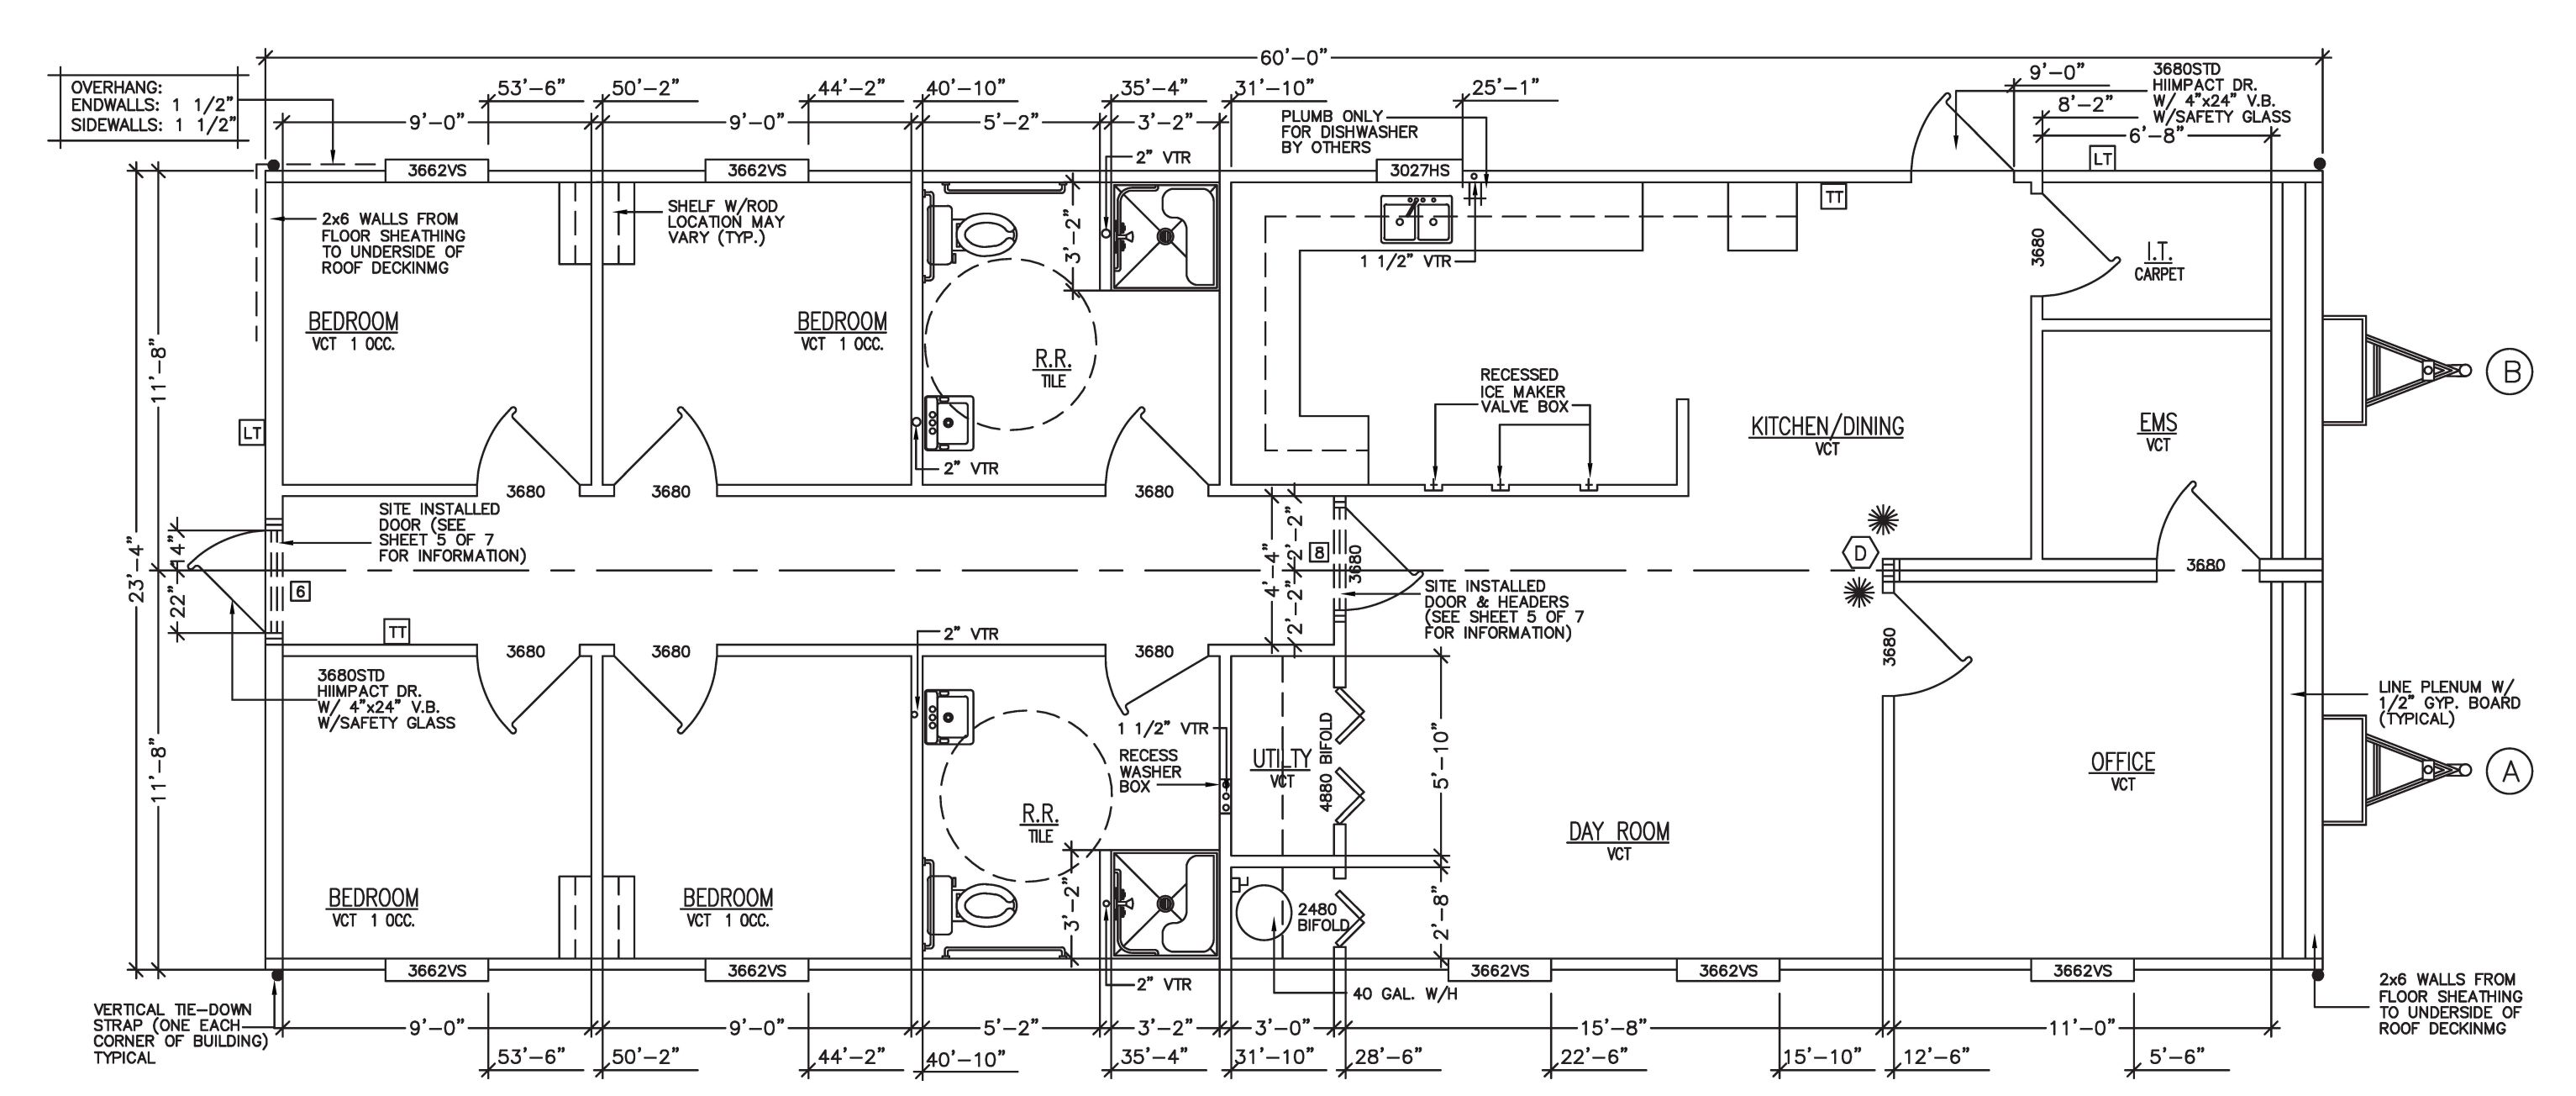 Floor Plan of Double Wide Prefabricated Fire Station Building